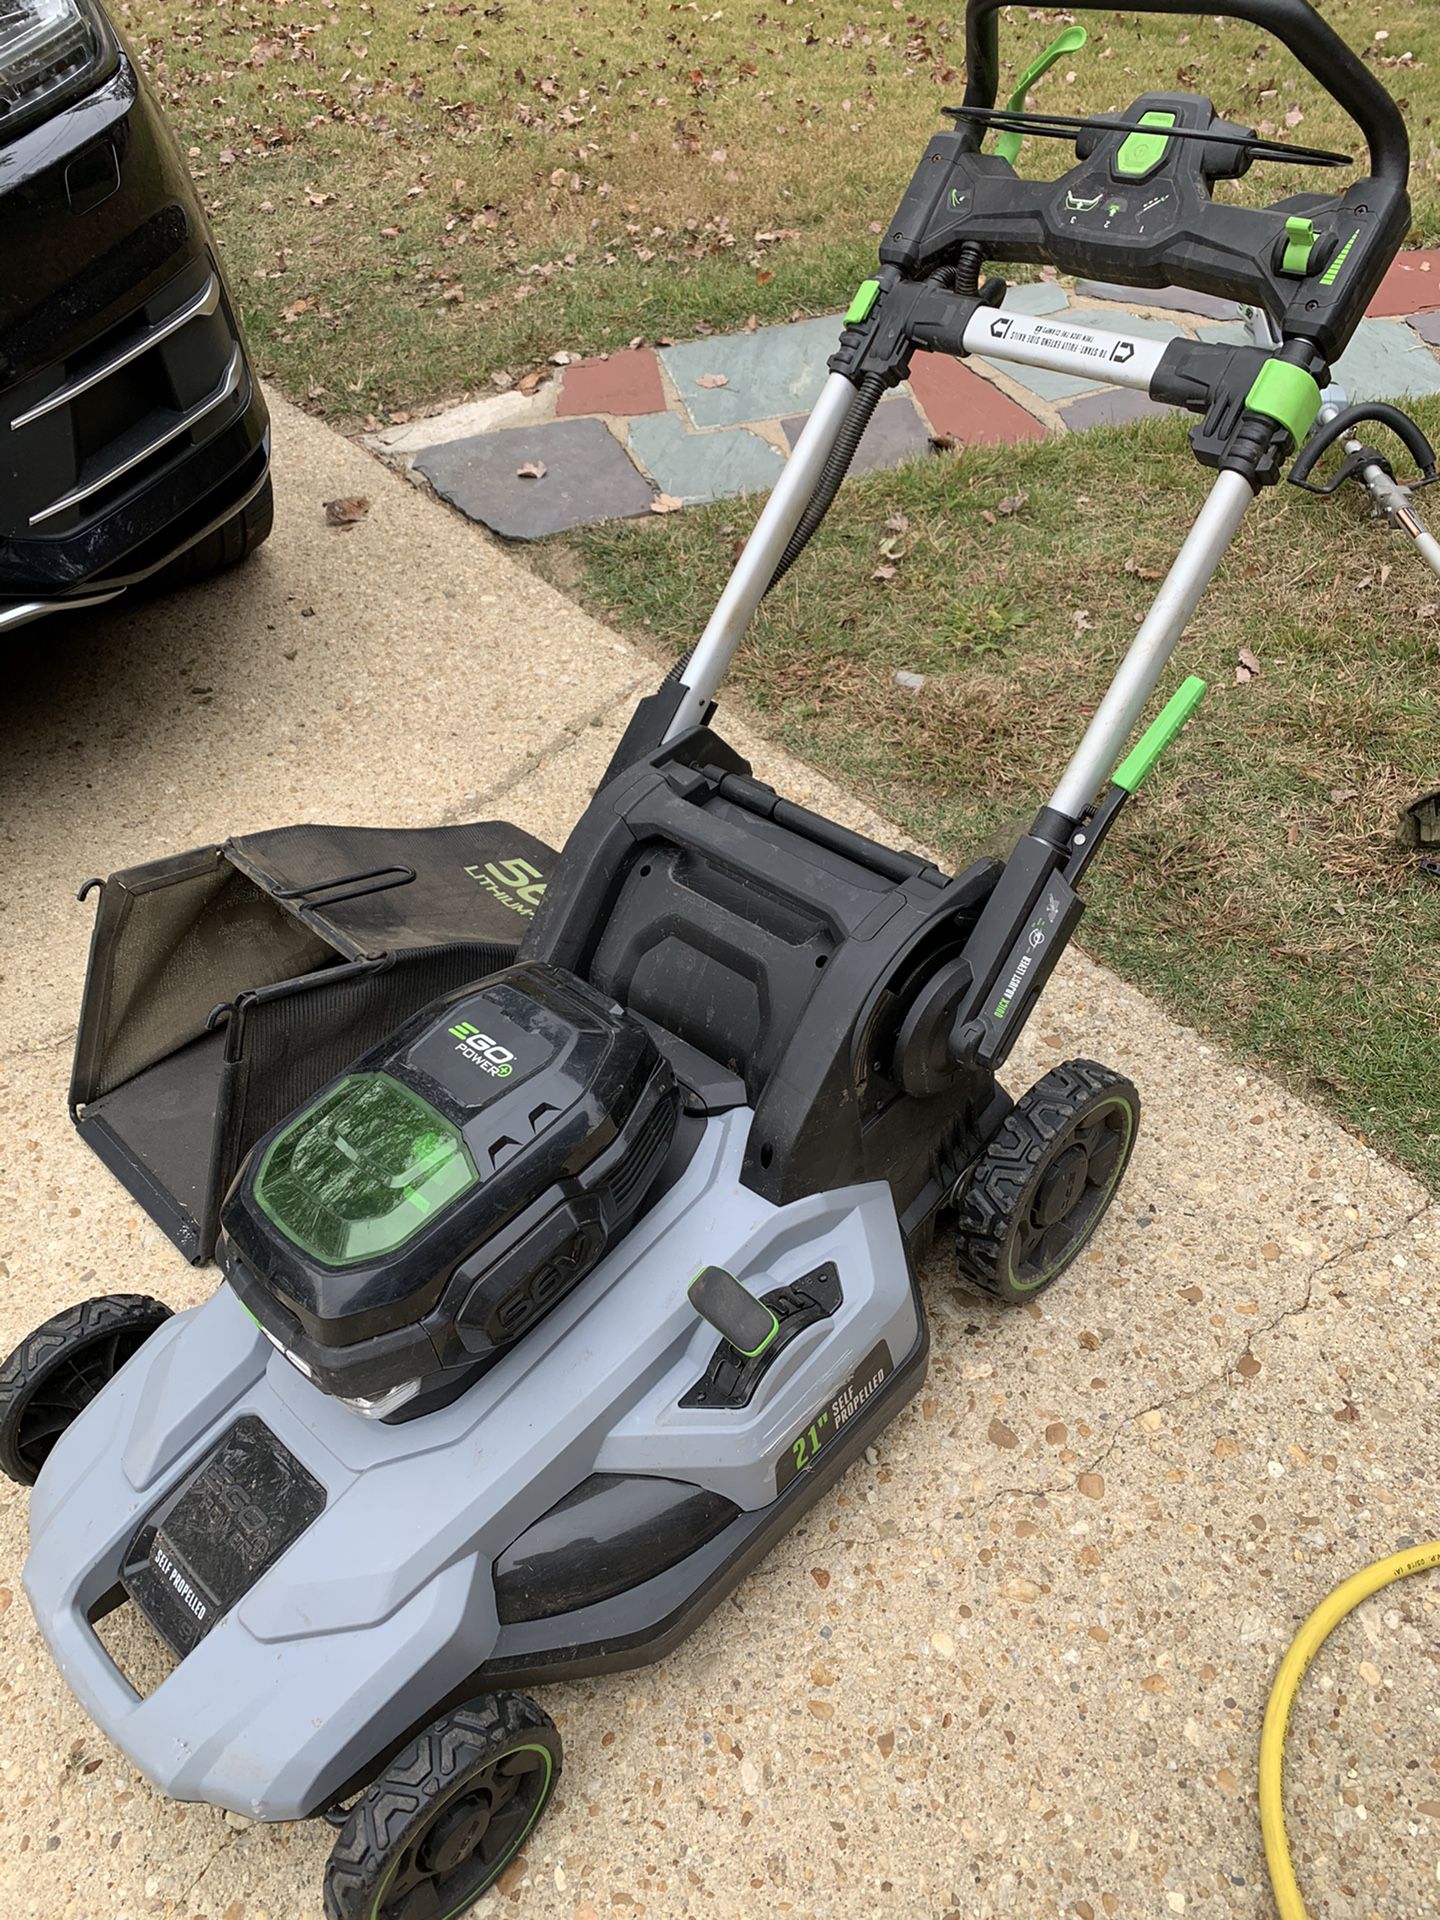 EGO LAWN CARE BUNDLE (MOWER, TRIMMER, BLOWER, BATTERIES, CHARGERS